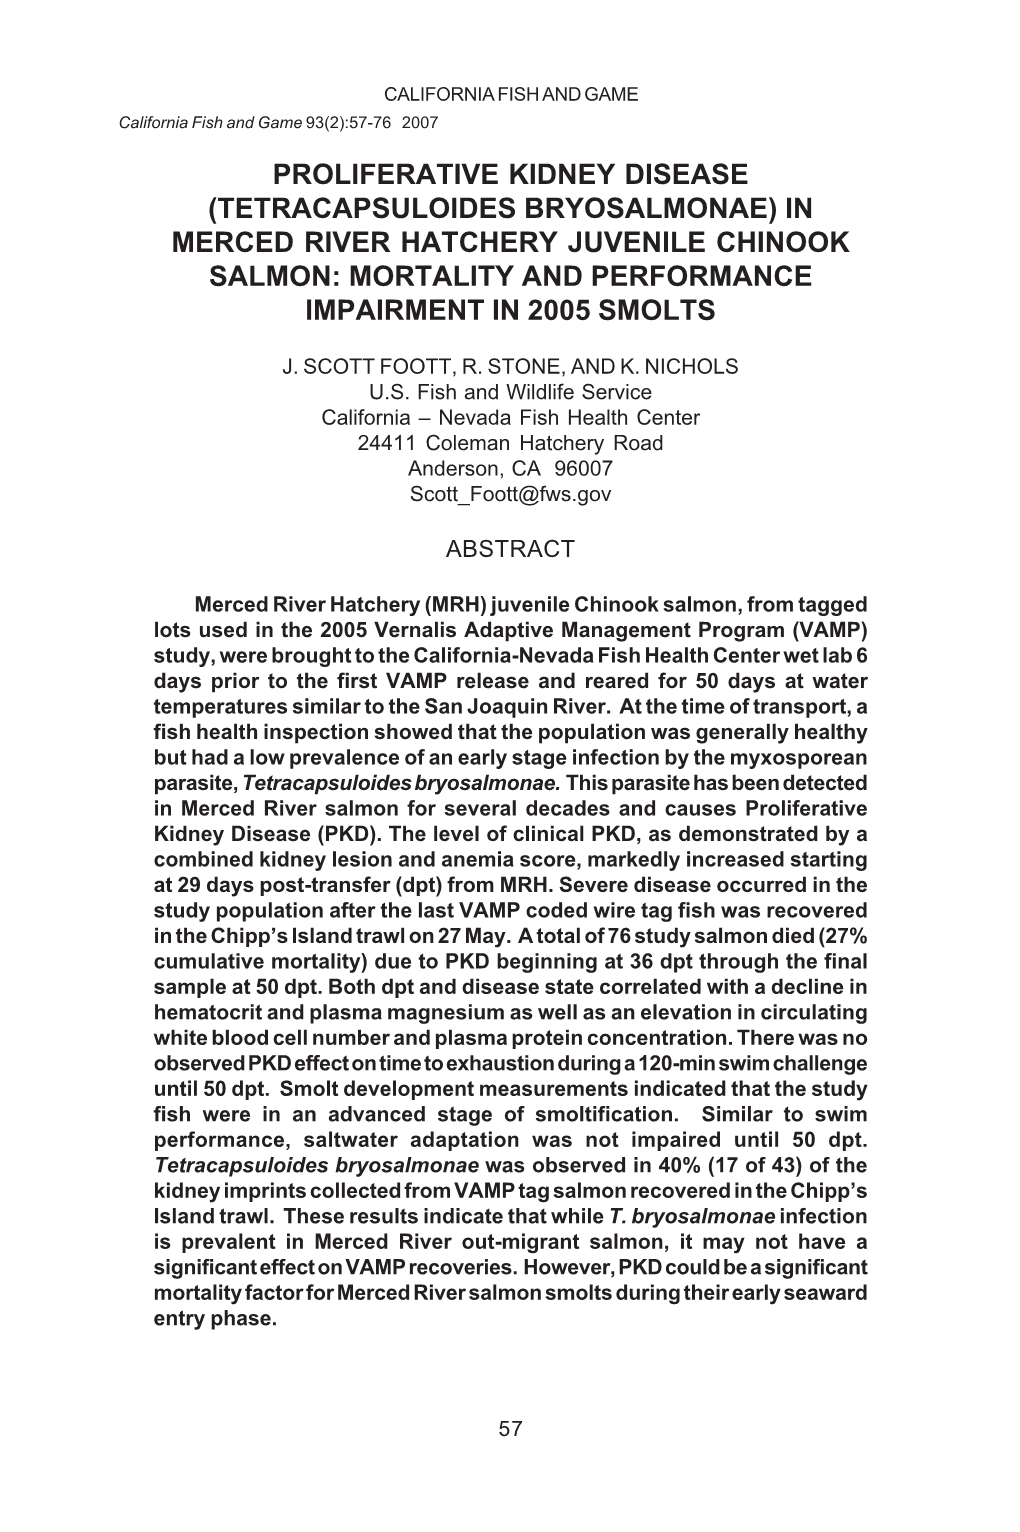 Proliferative Kidney Disease (Tetracapsuloides Bryosalmonae) in Merced River Hatchery Juvenile Chinook Salmon: Mortality and Performance Impairment in 2005 Smolts